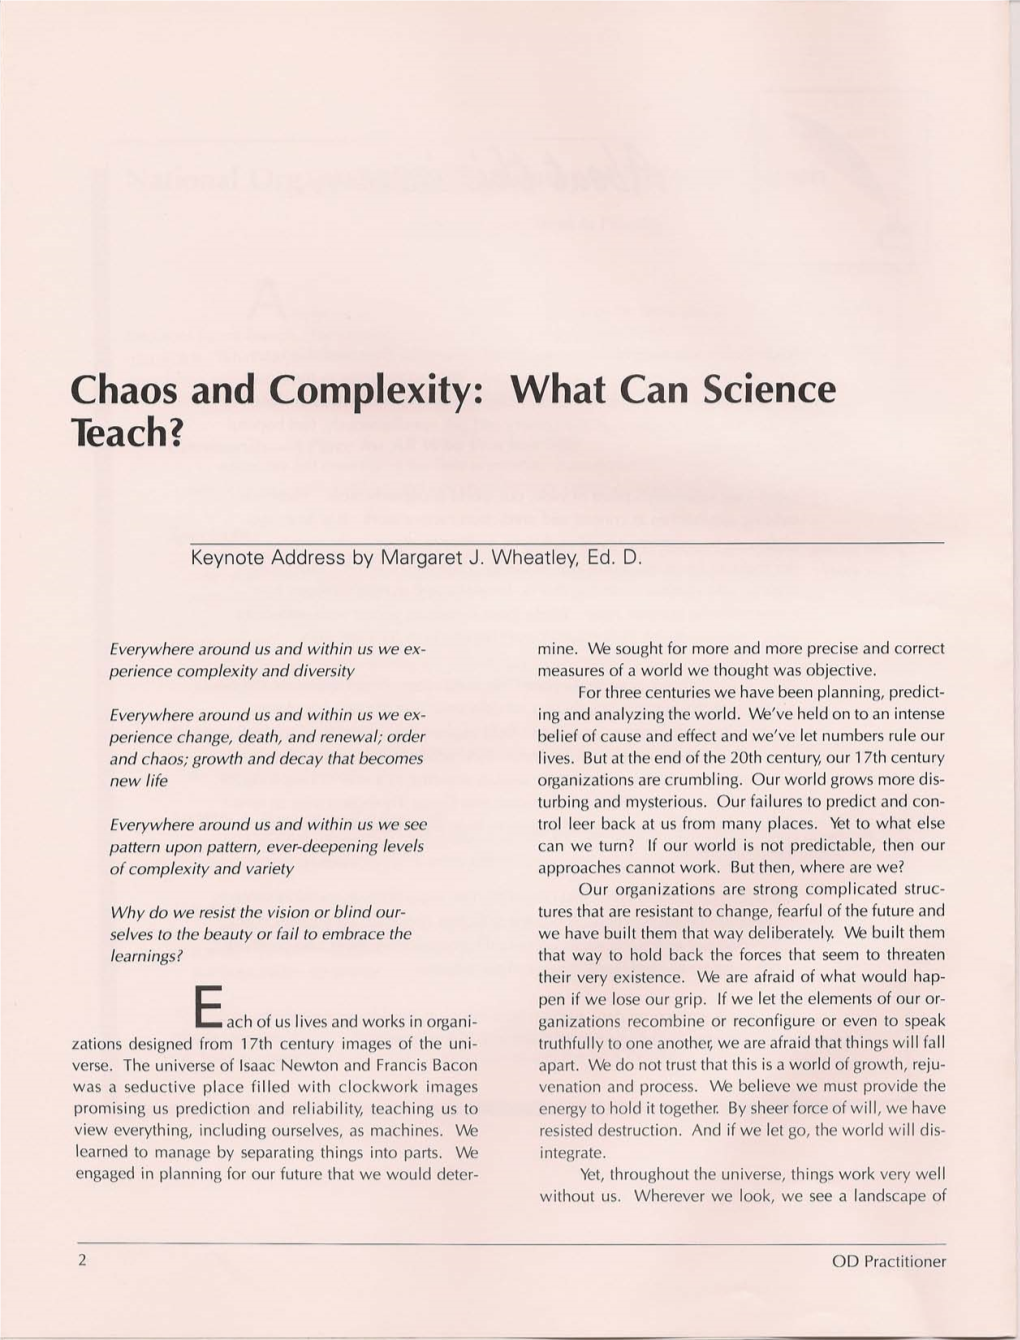 Chaos and Complexity: Teach? What Can Science